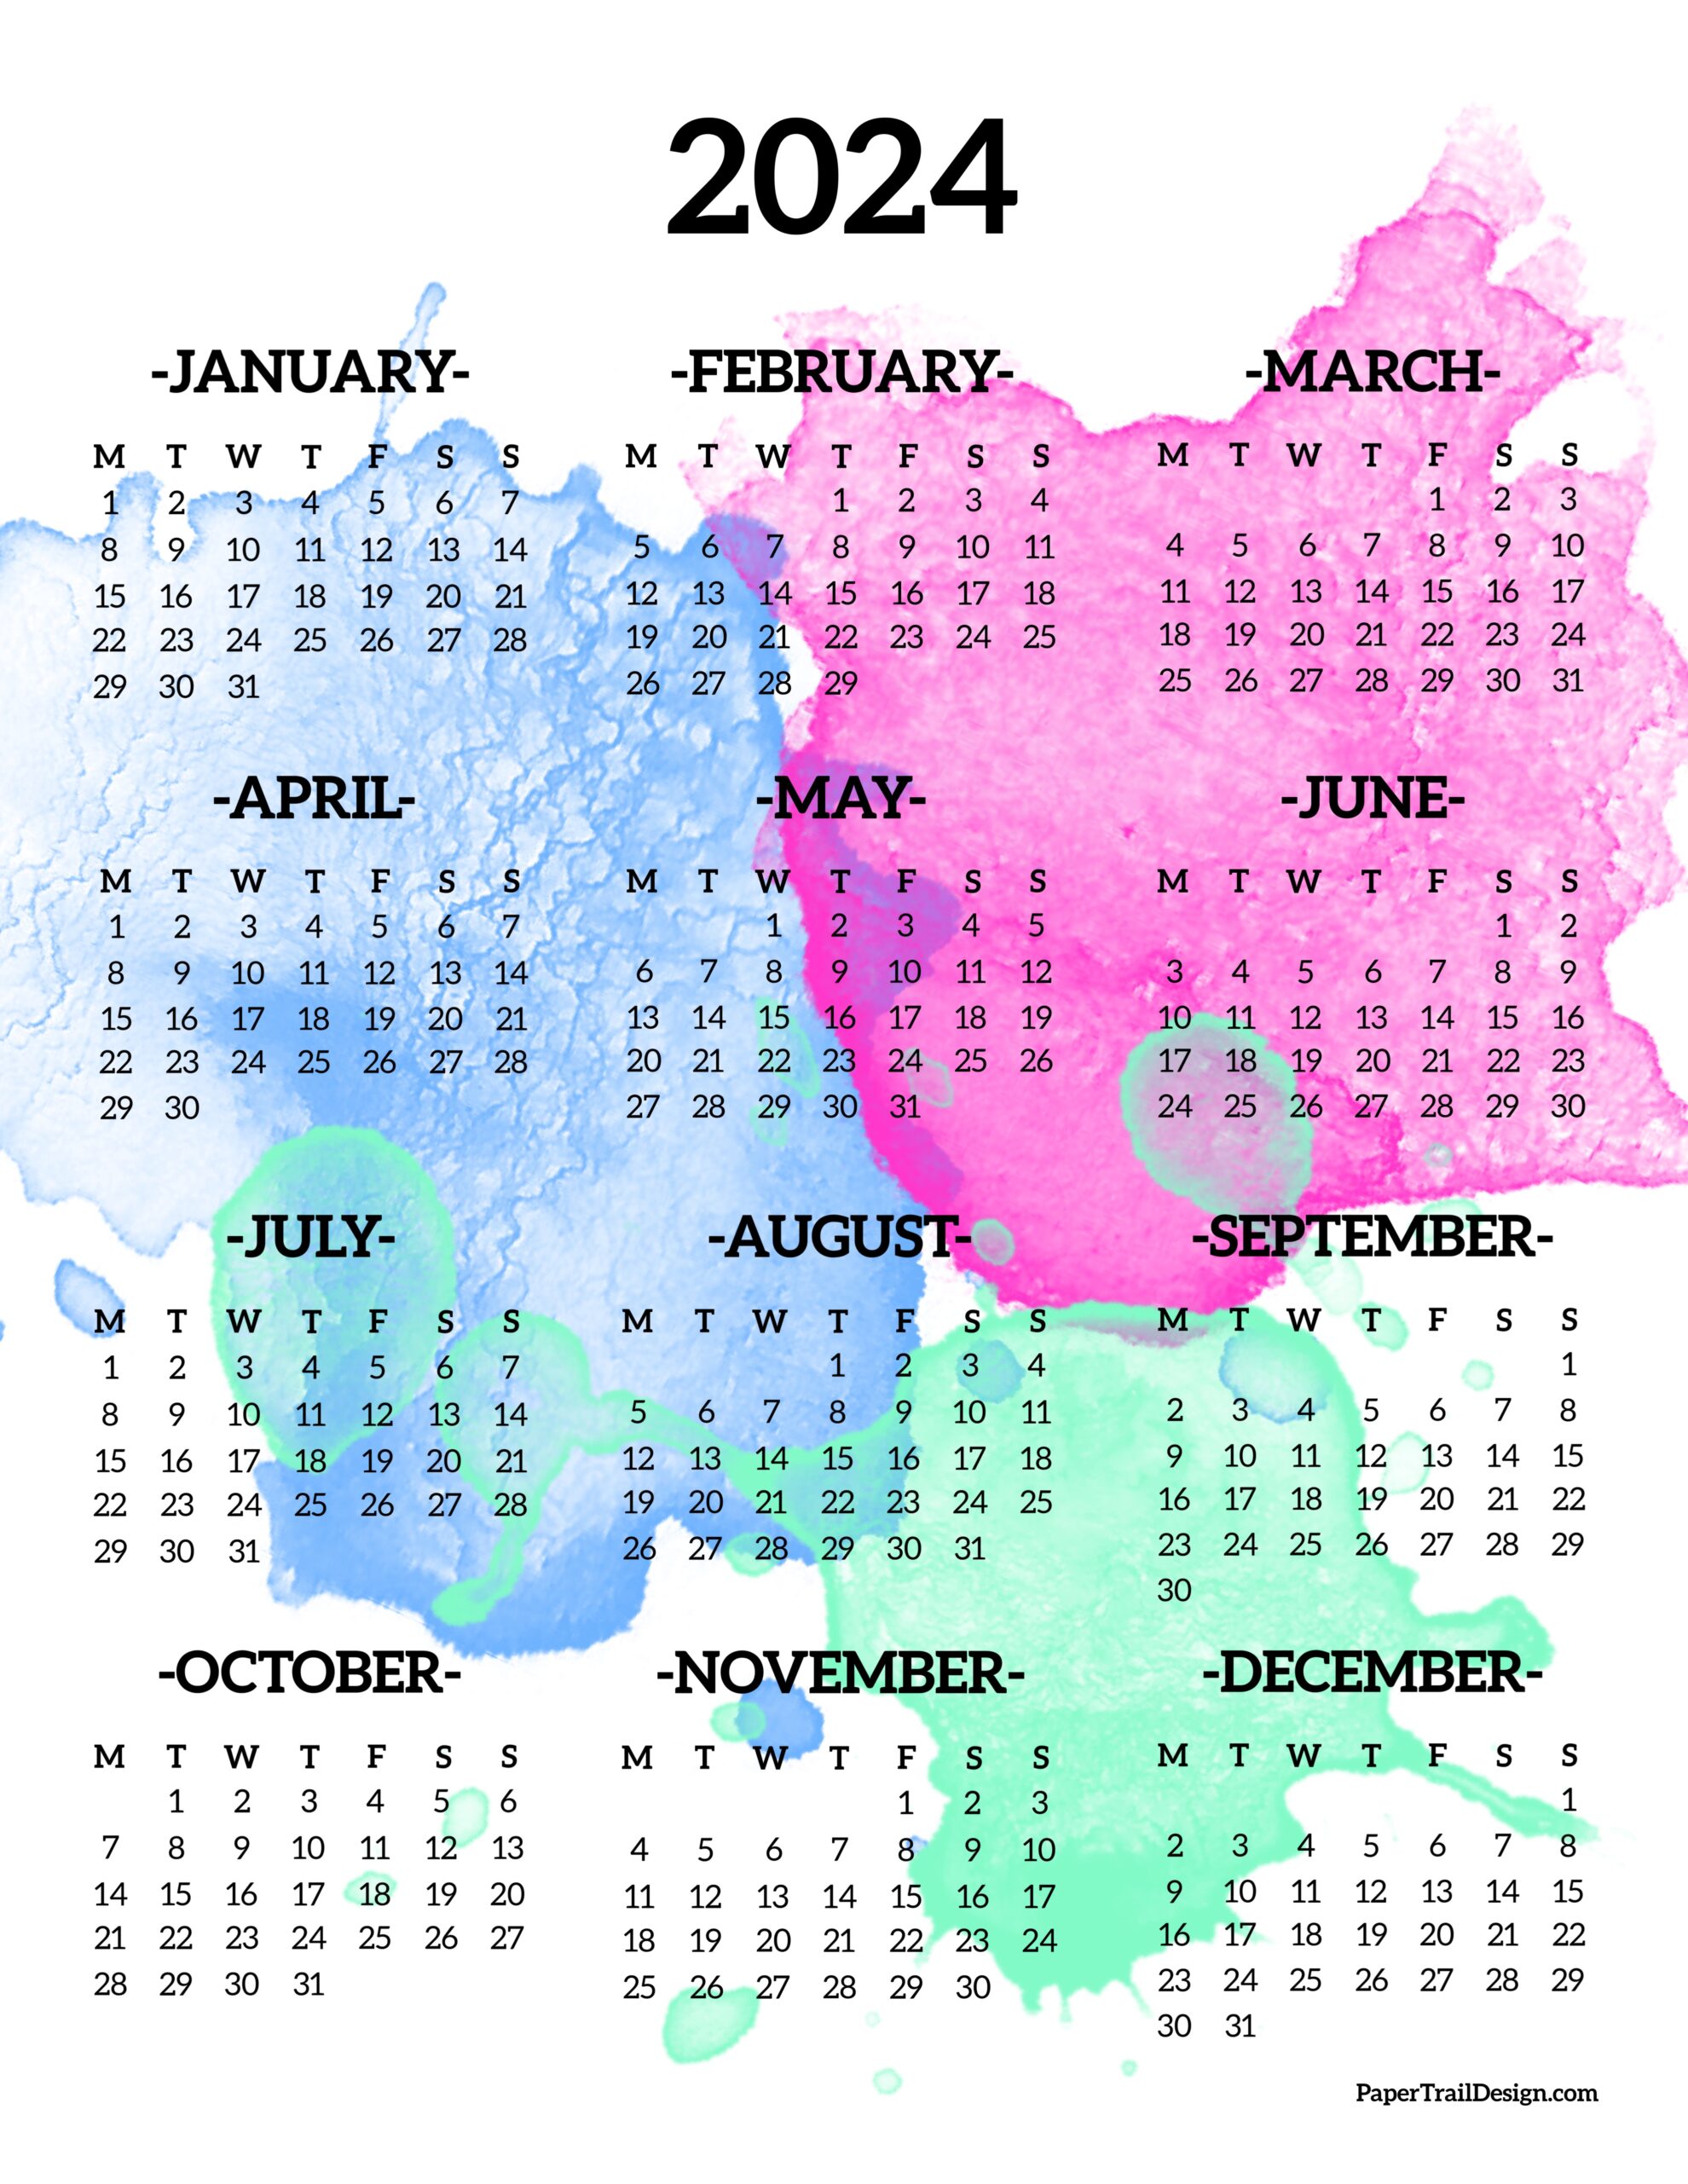 Calendar 2024 Printable One Page - Paper Trail Design